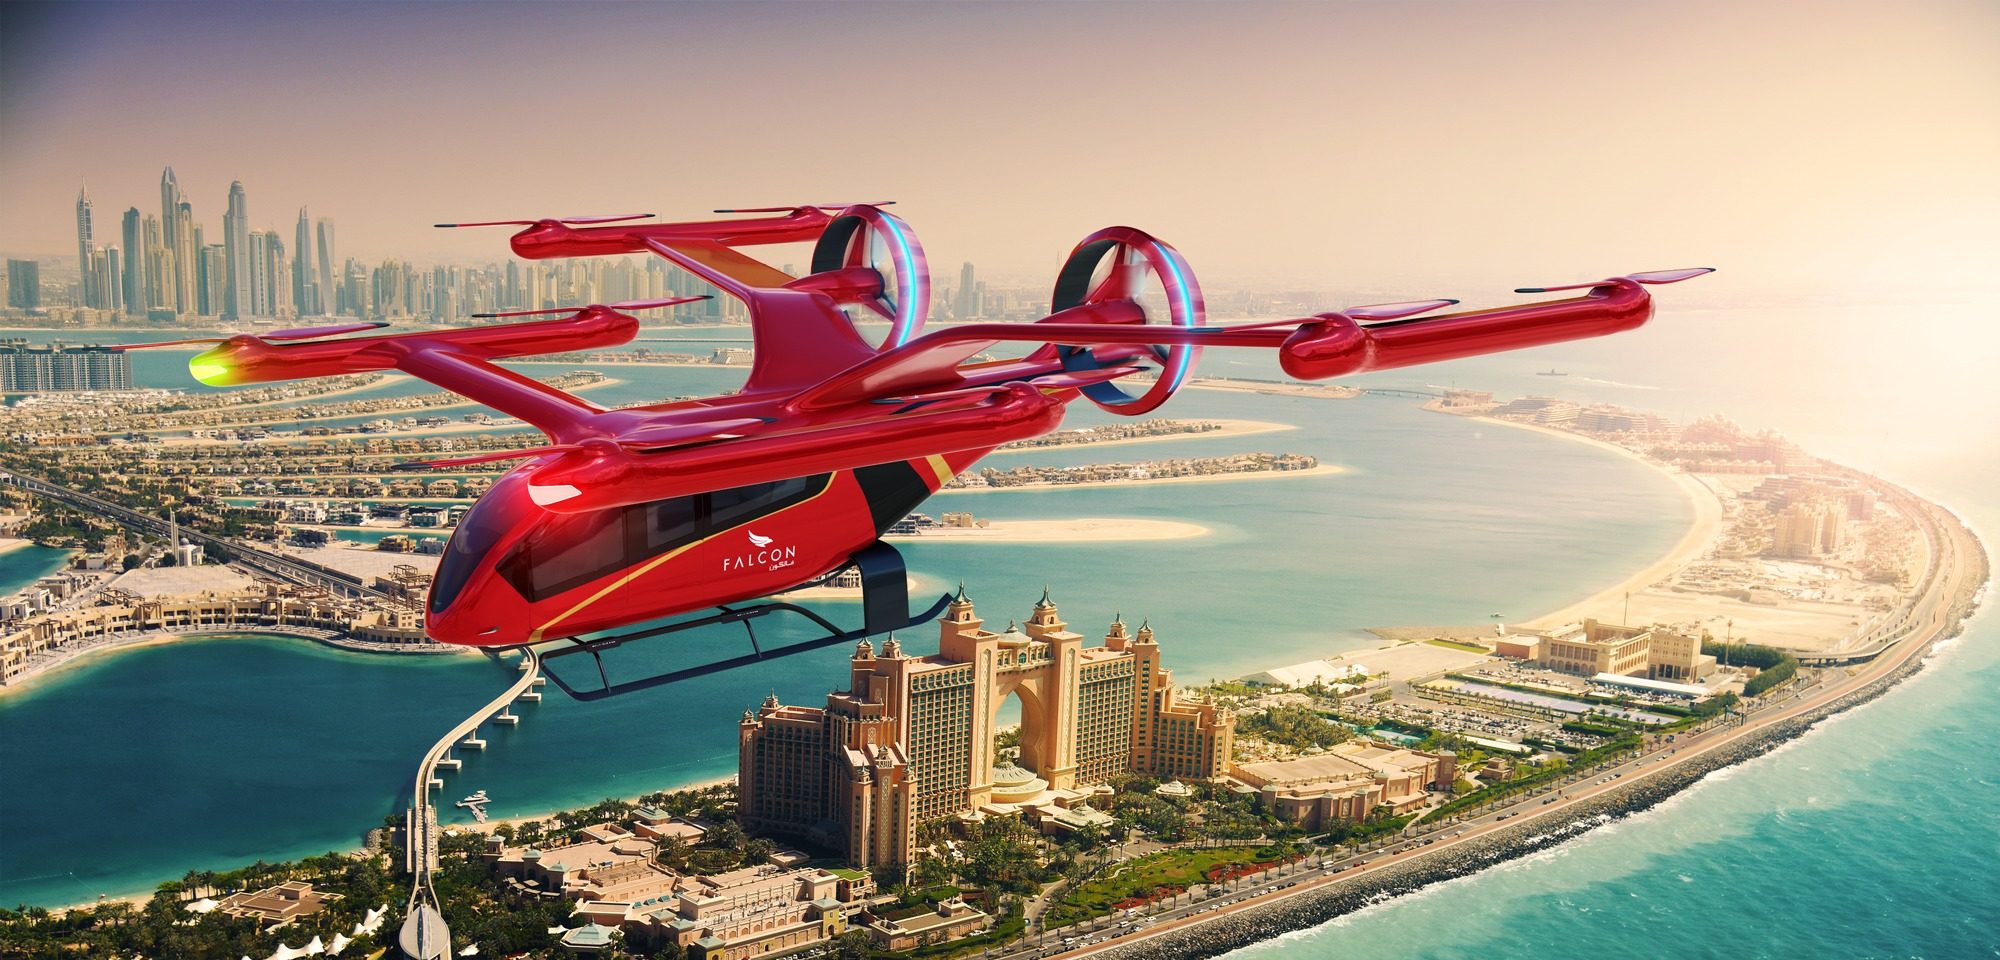 Eve and Falcon Aviation Services announce partnership to introduce eVTOL flights in Dubai